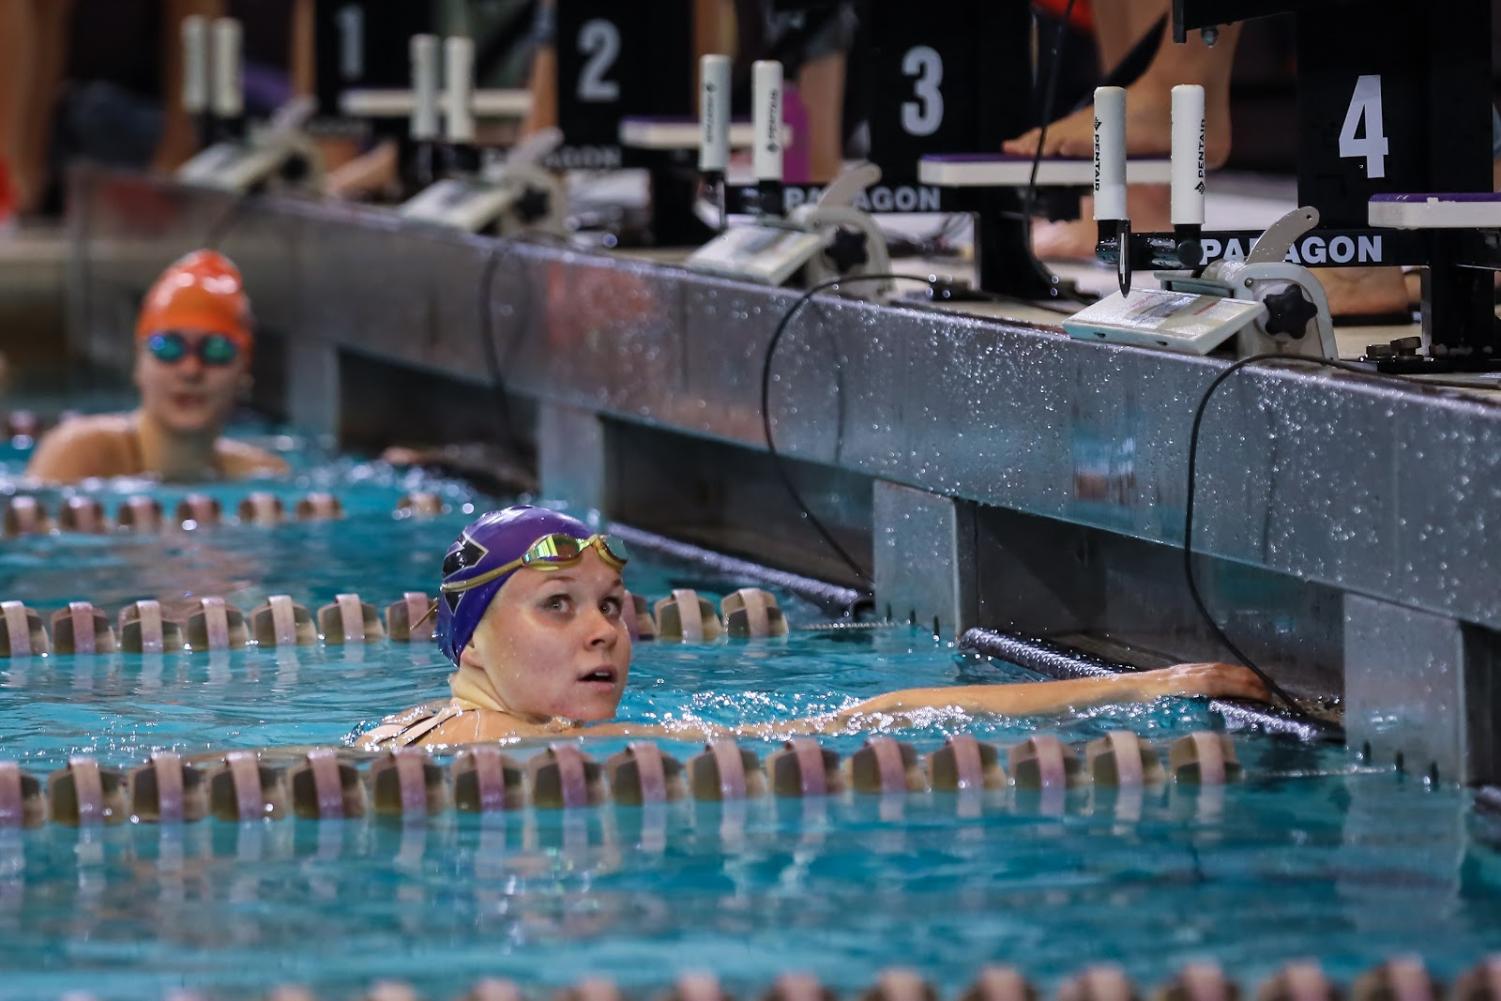 A Northwestern swimmer at the edge of the pool hangs their arms on the starting block while looking to the side. 